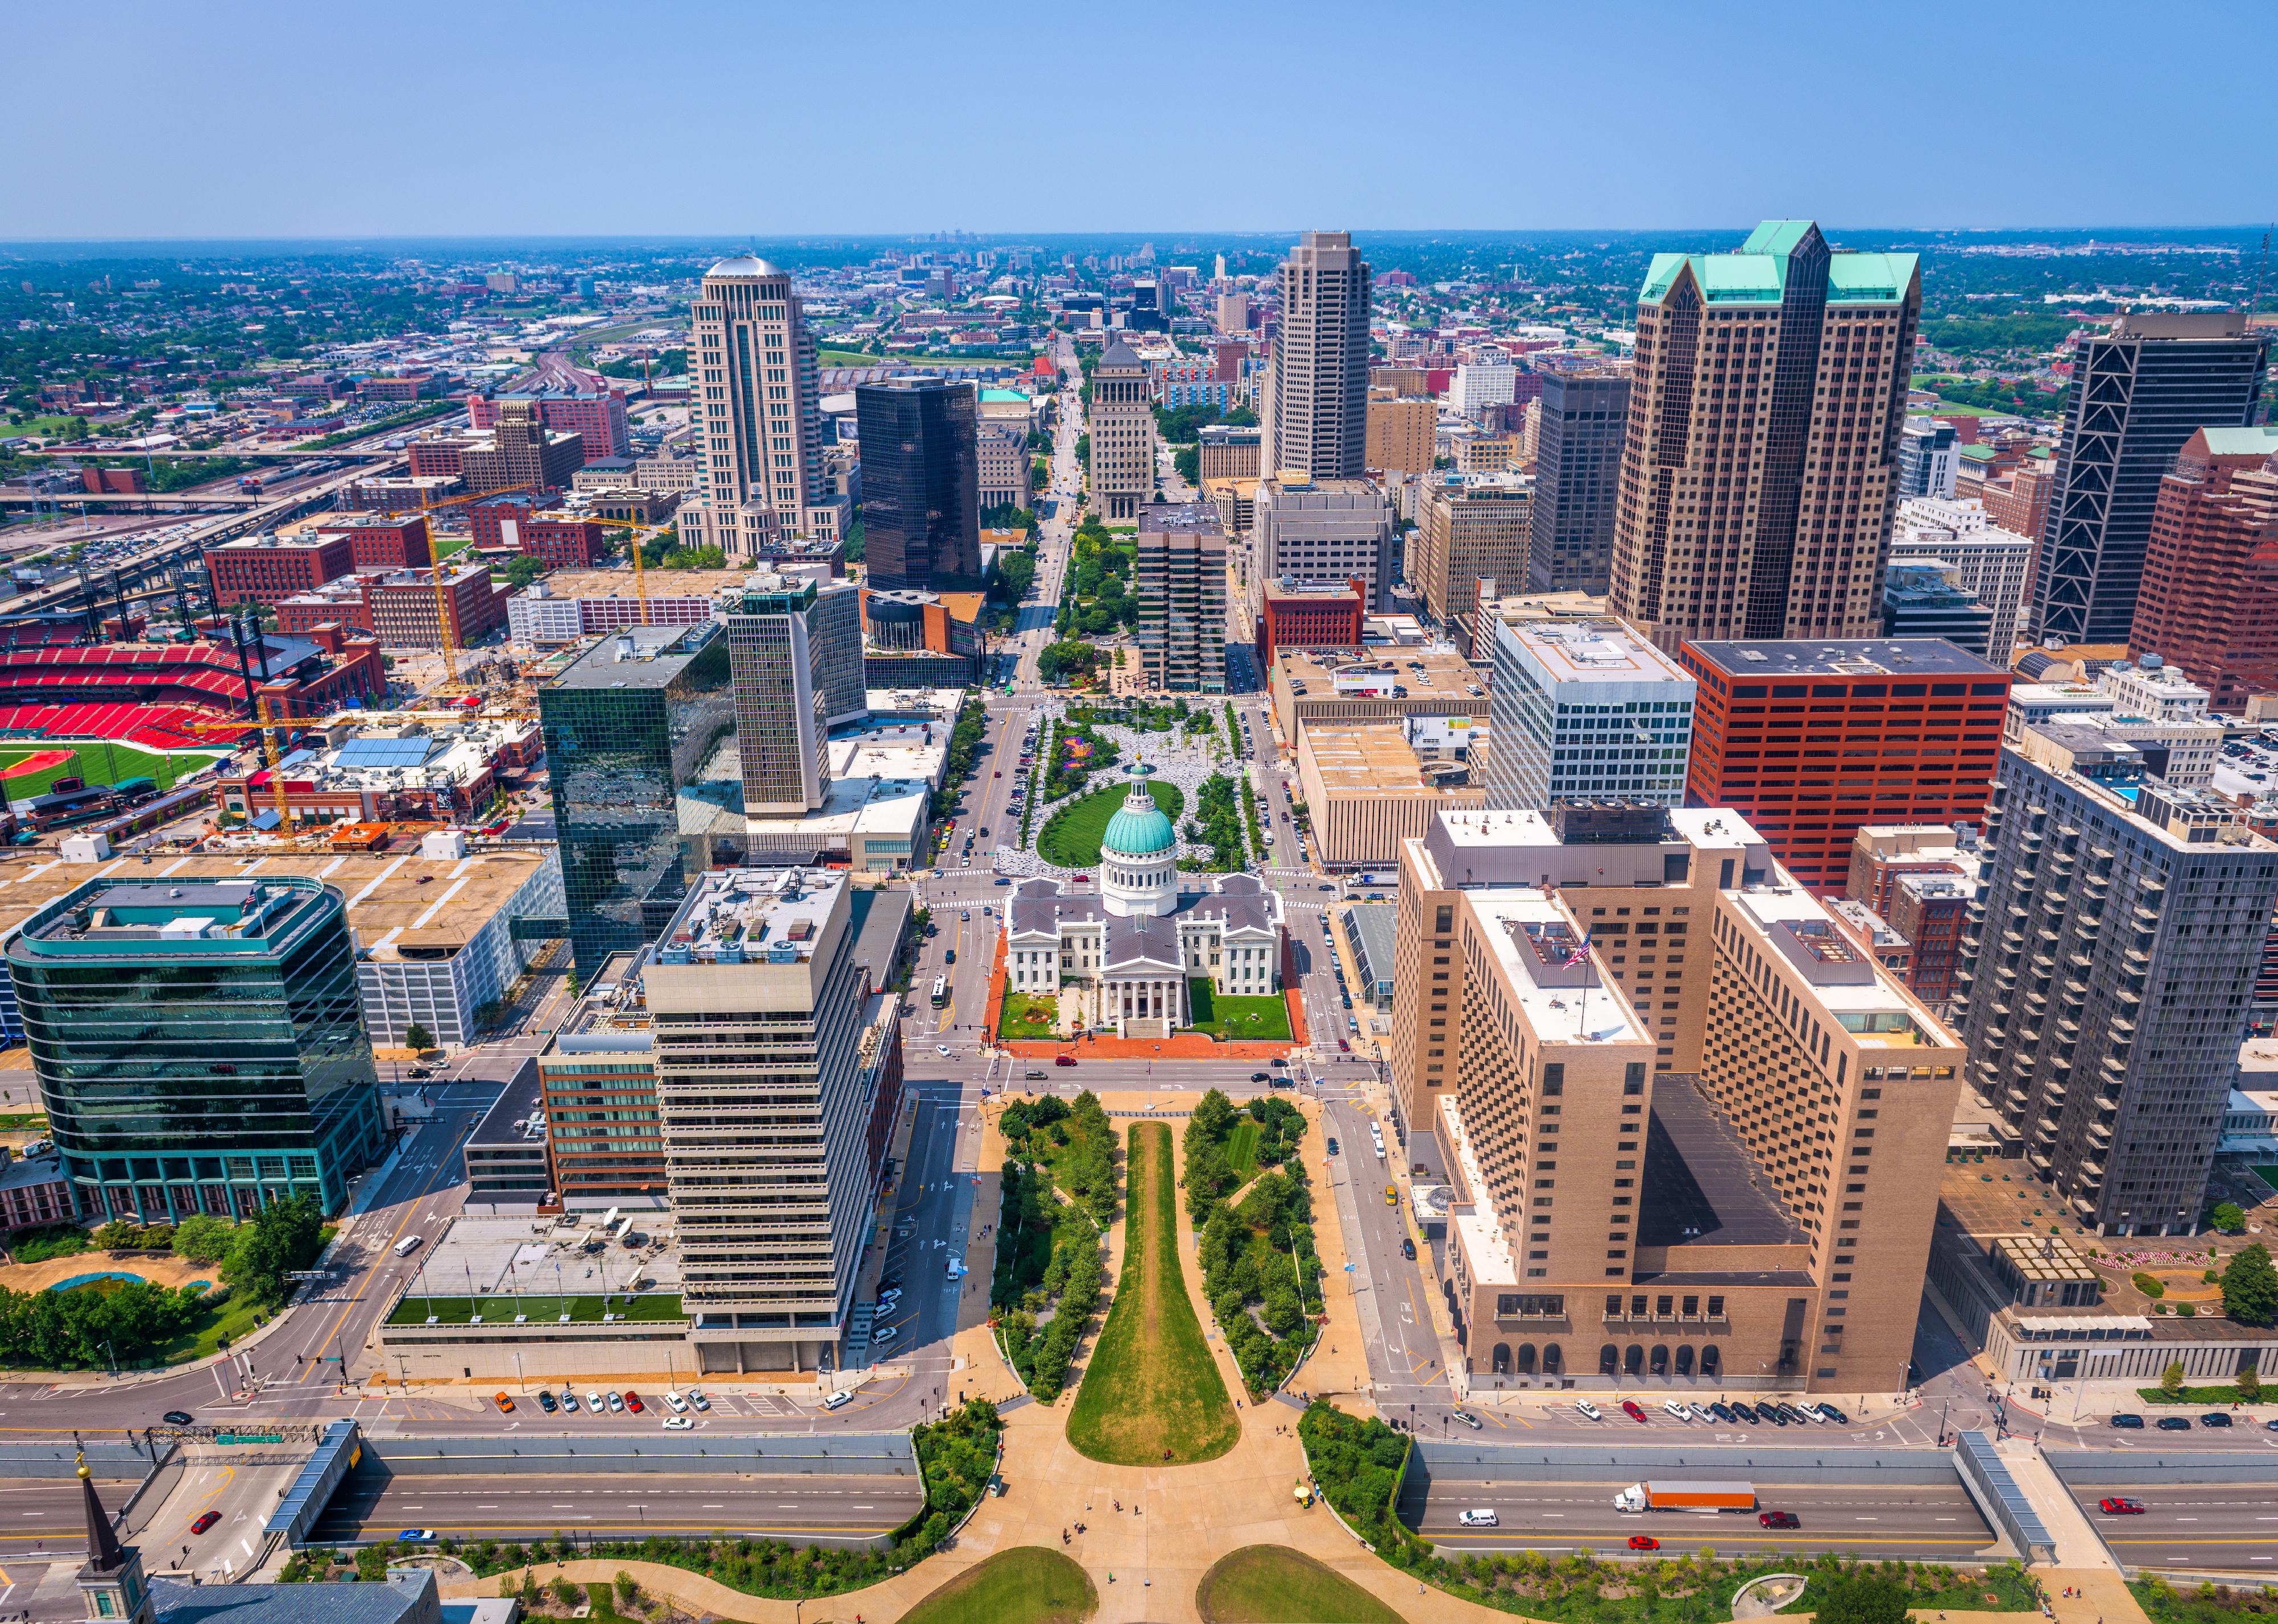 St. Louis' downtown skyline from above.